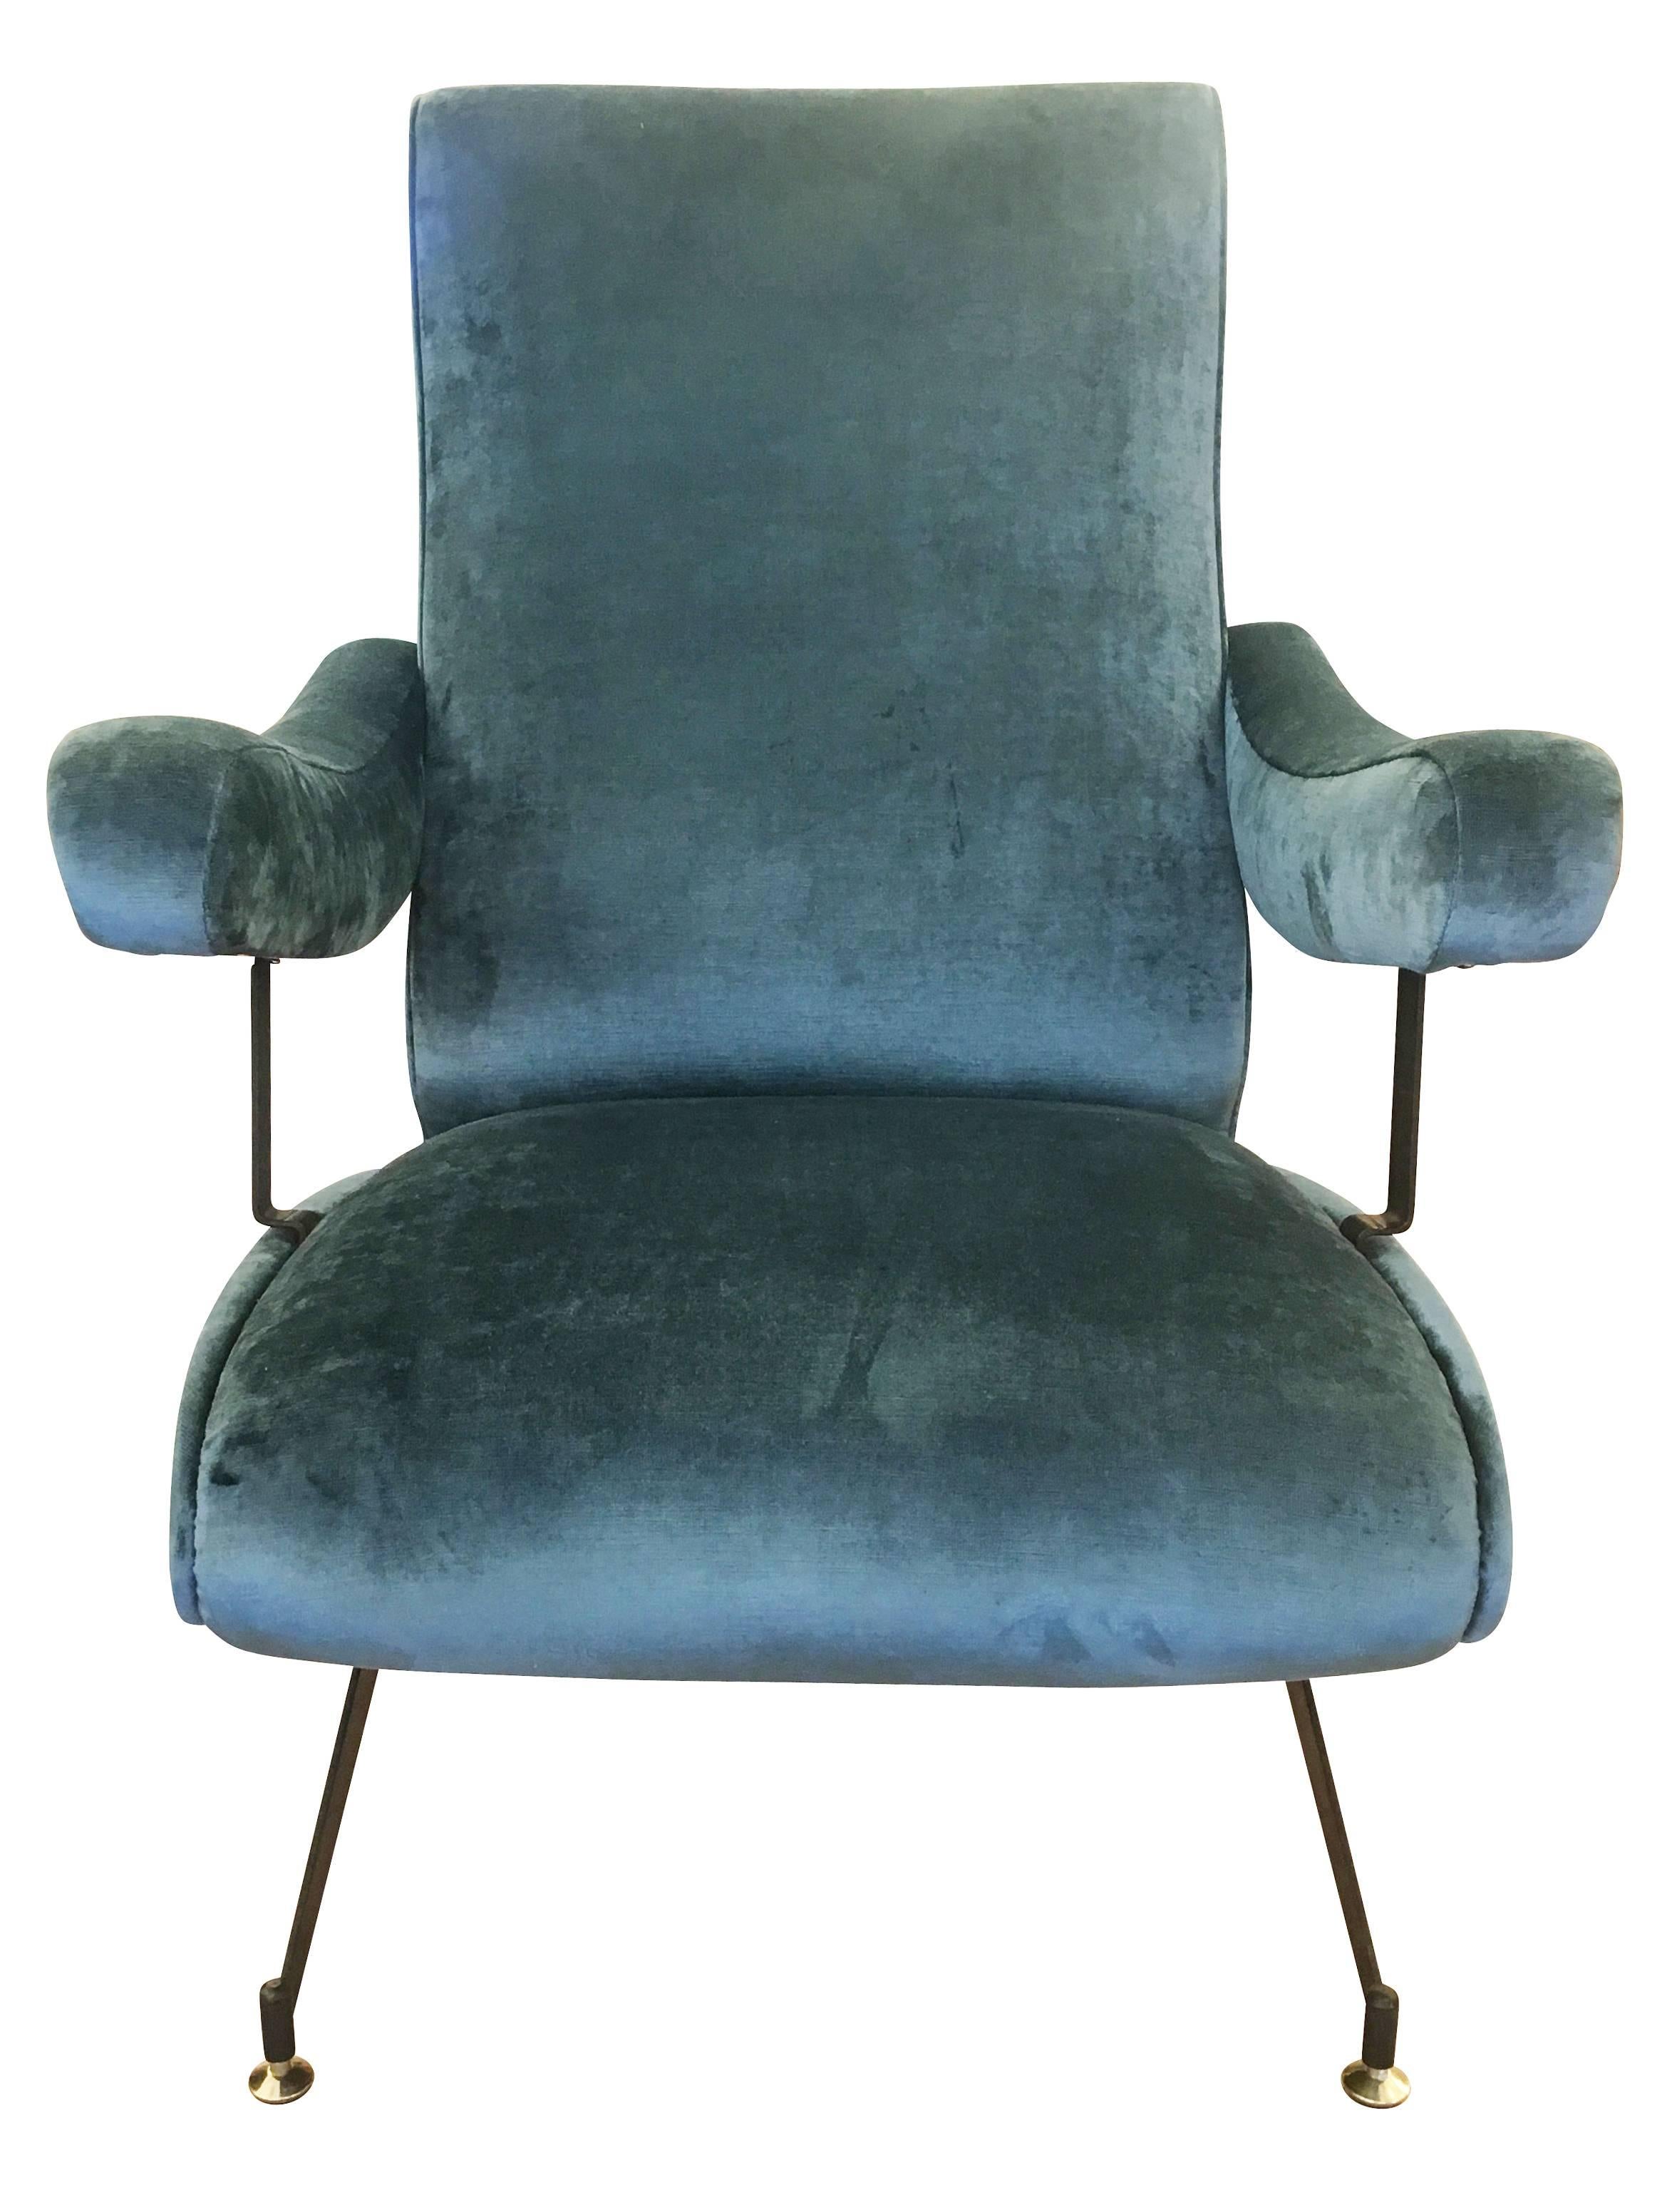 Mid-20th Century Reclining Lounge Chair by Formanova